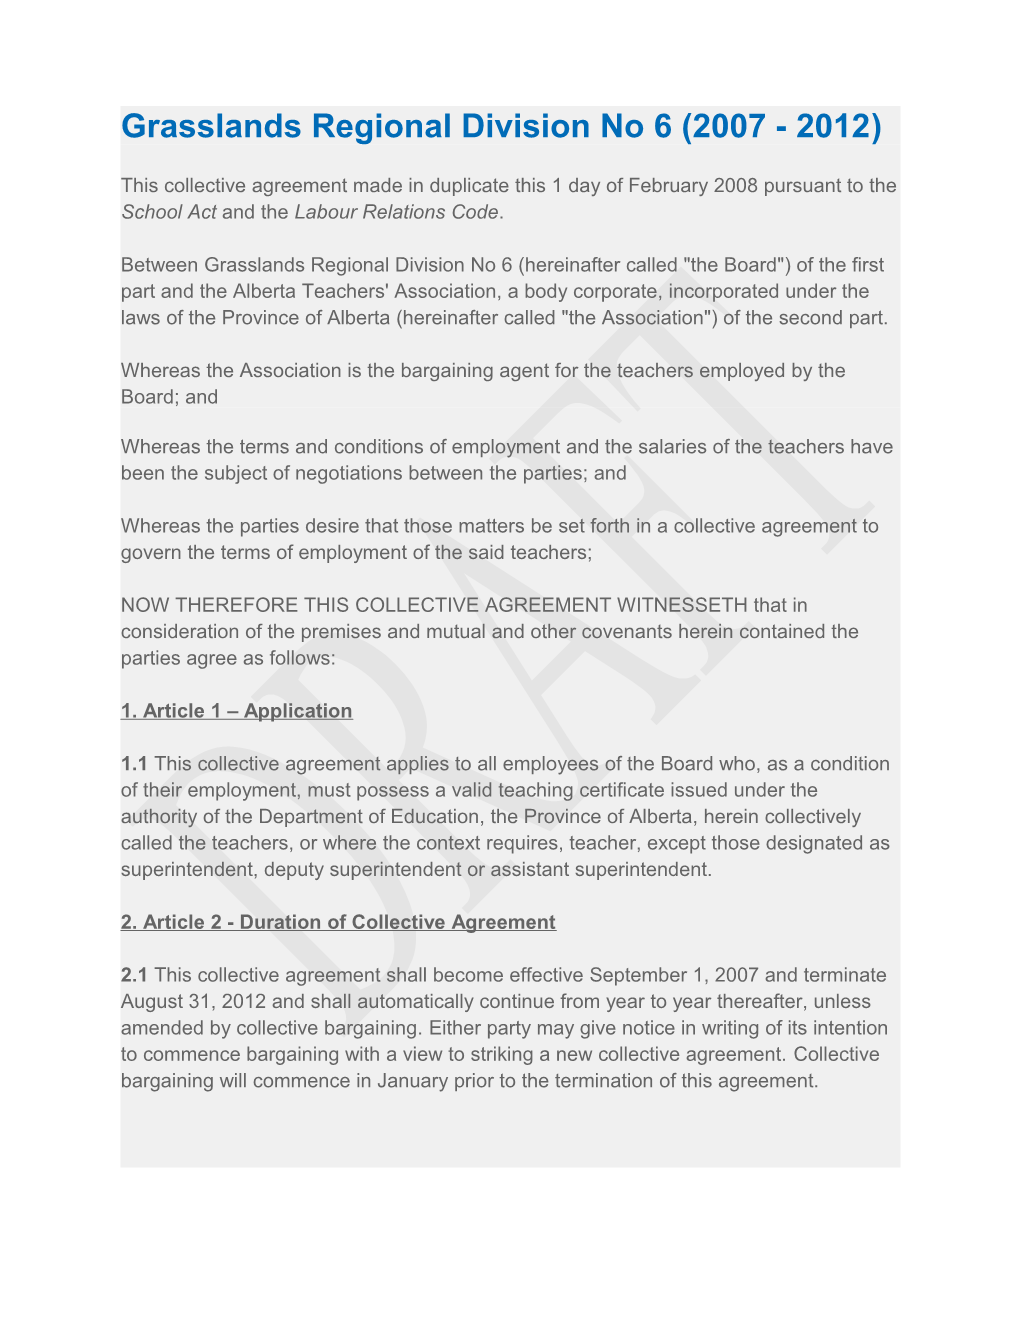 ADDENDUM to the 2008 2012 COLLECTIVE AGREEMENT BETWEEN FORT Mcmurray SCHOOL DISTRICT NO